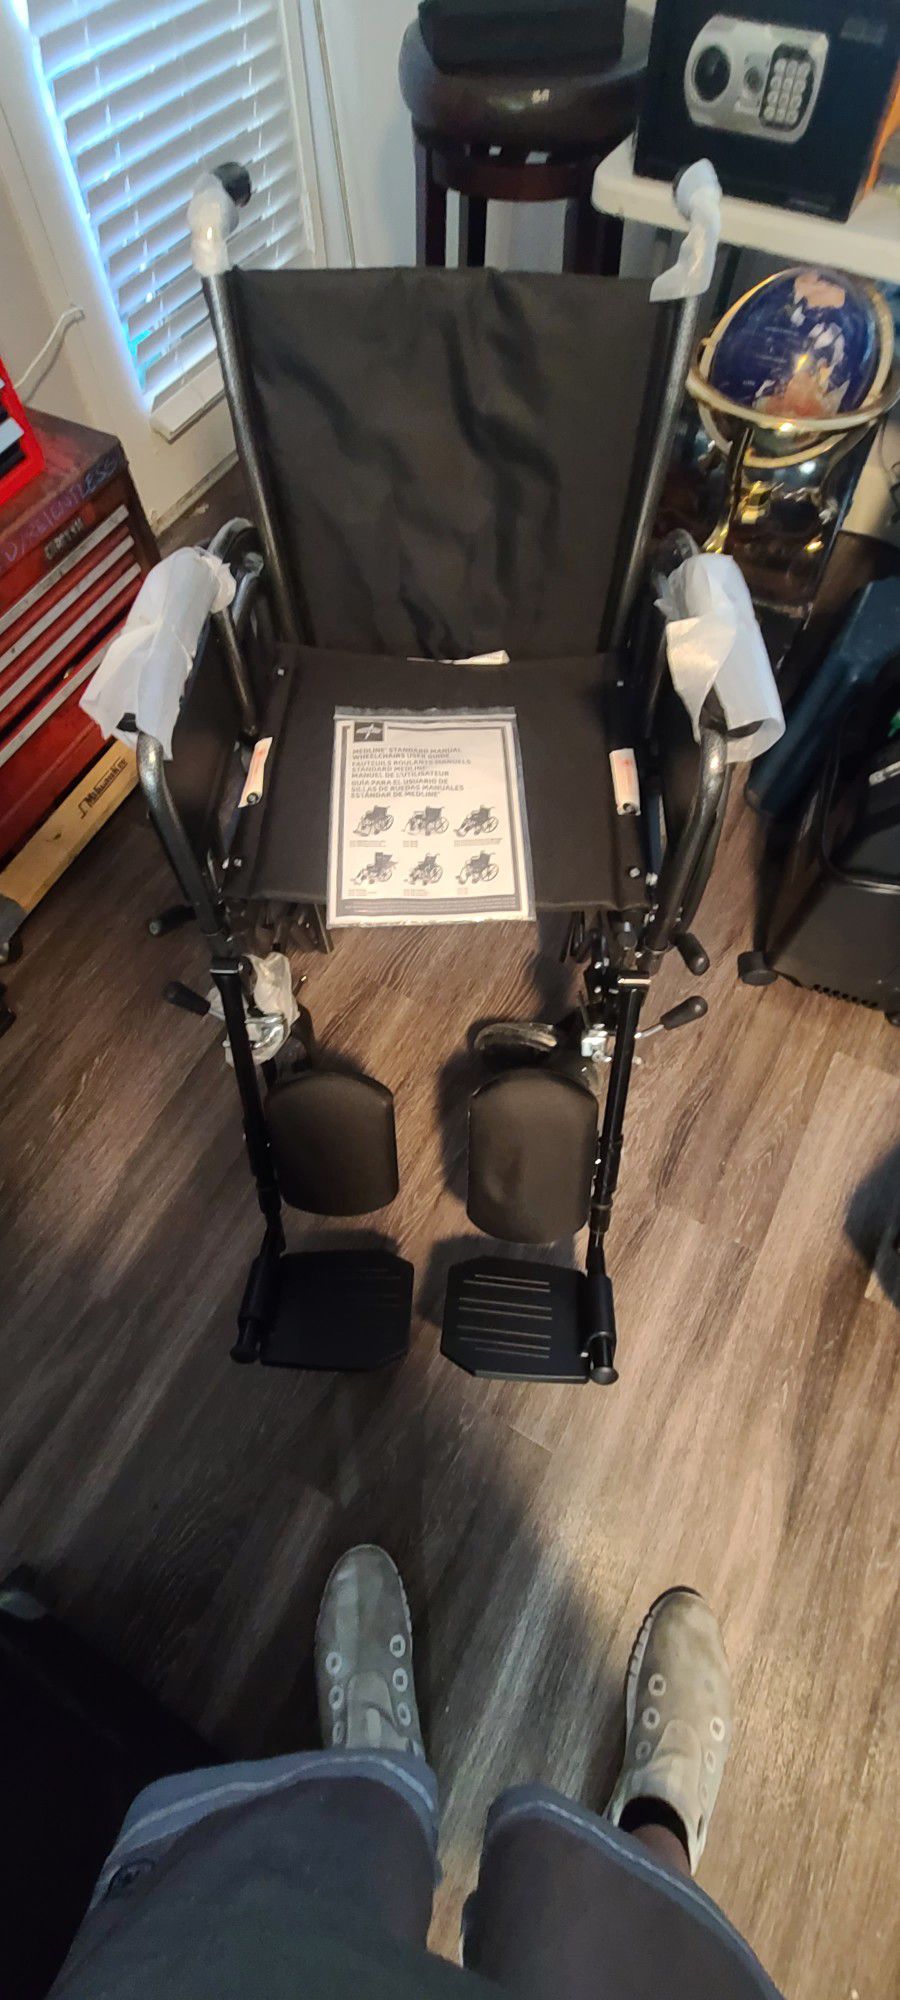 MEDLINE EXCELL WHEEL CHAIR 